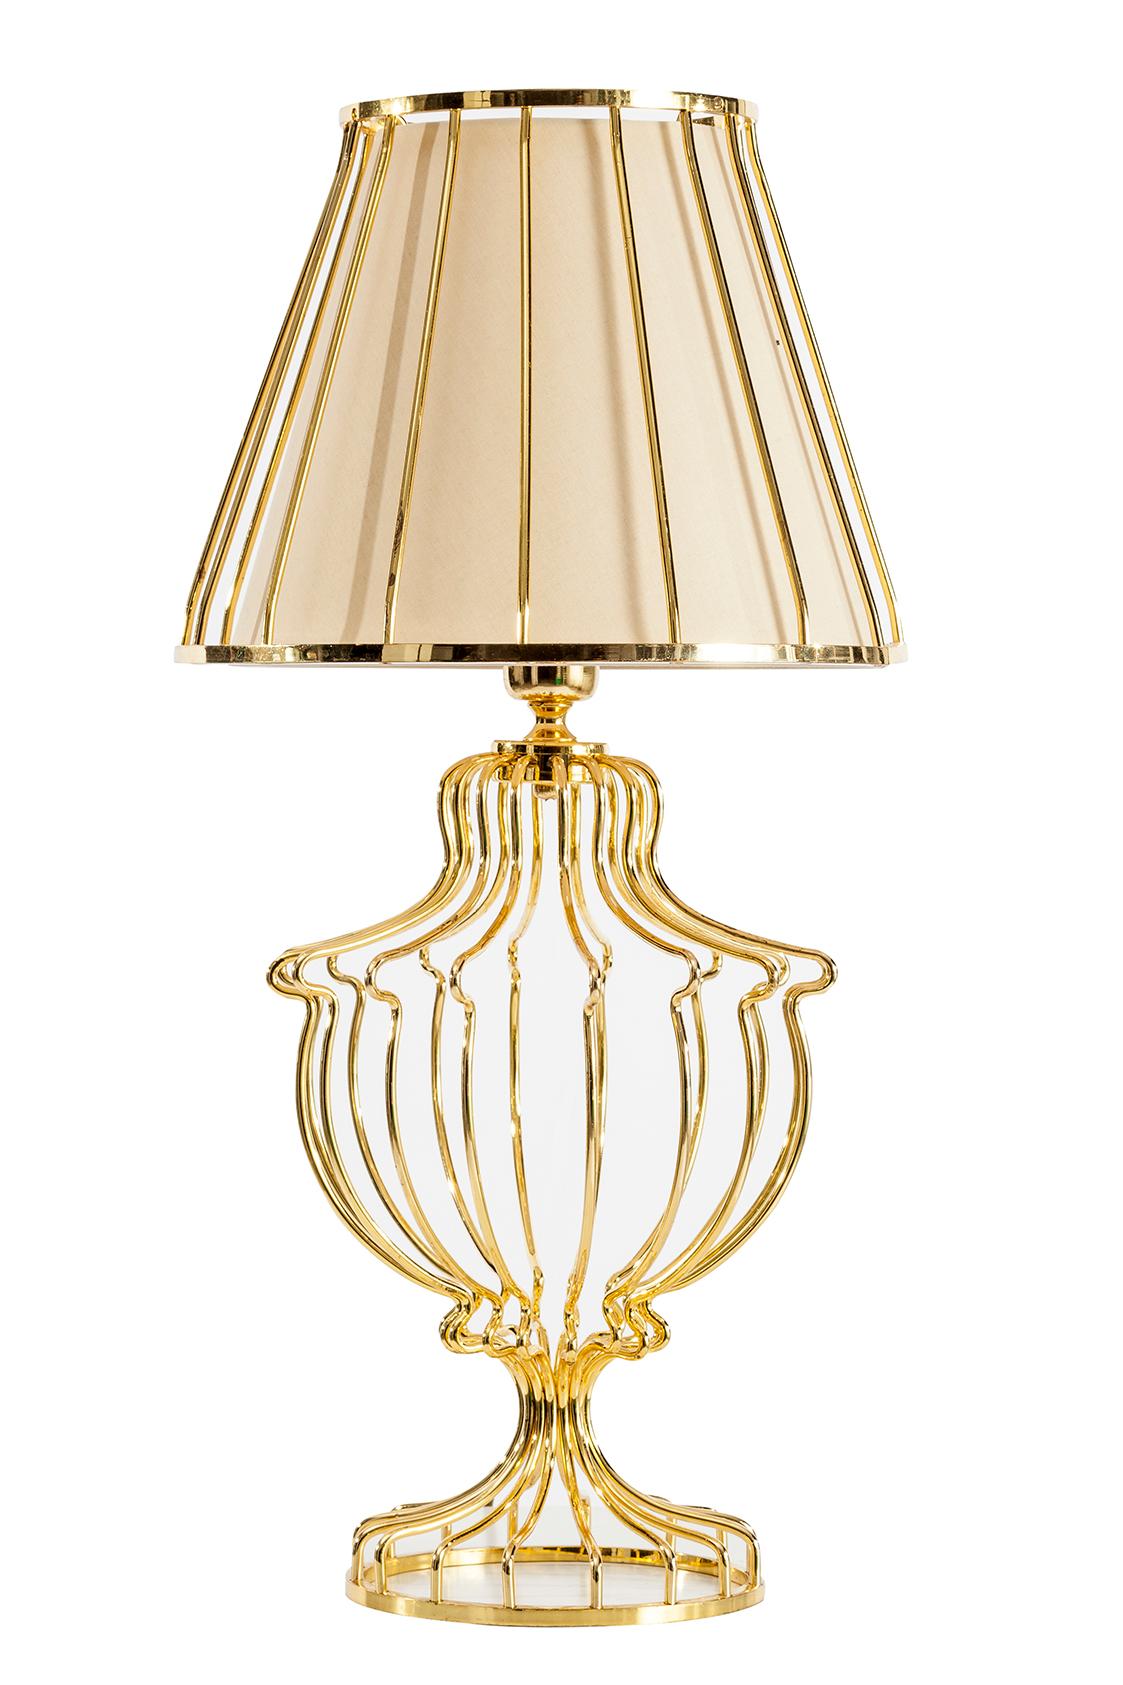 Kontra’s interpretation of classic lighting.
Modern take of a classic Victorian styled table lamp.